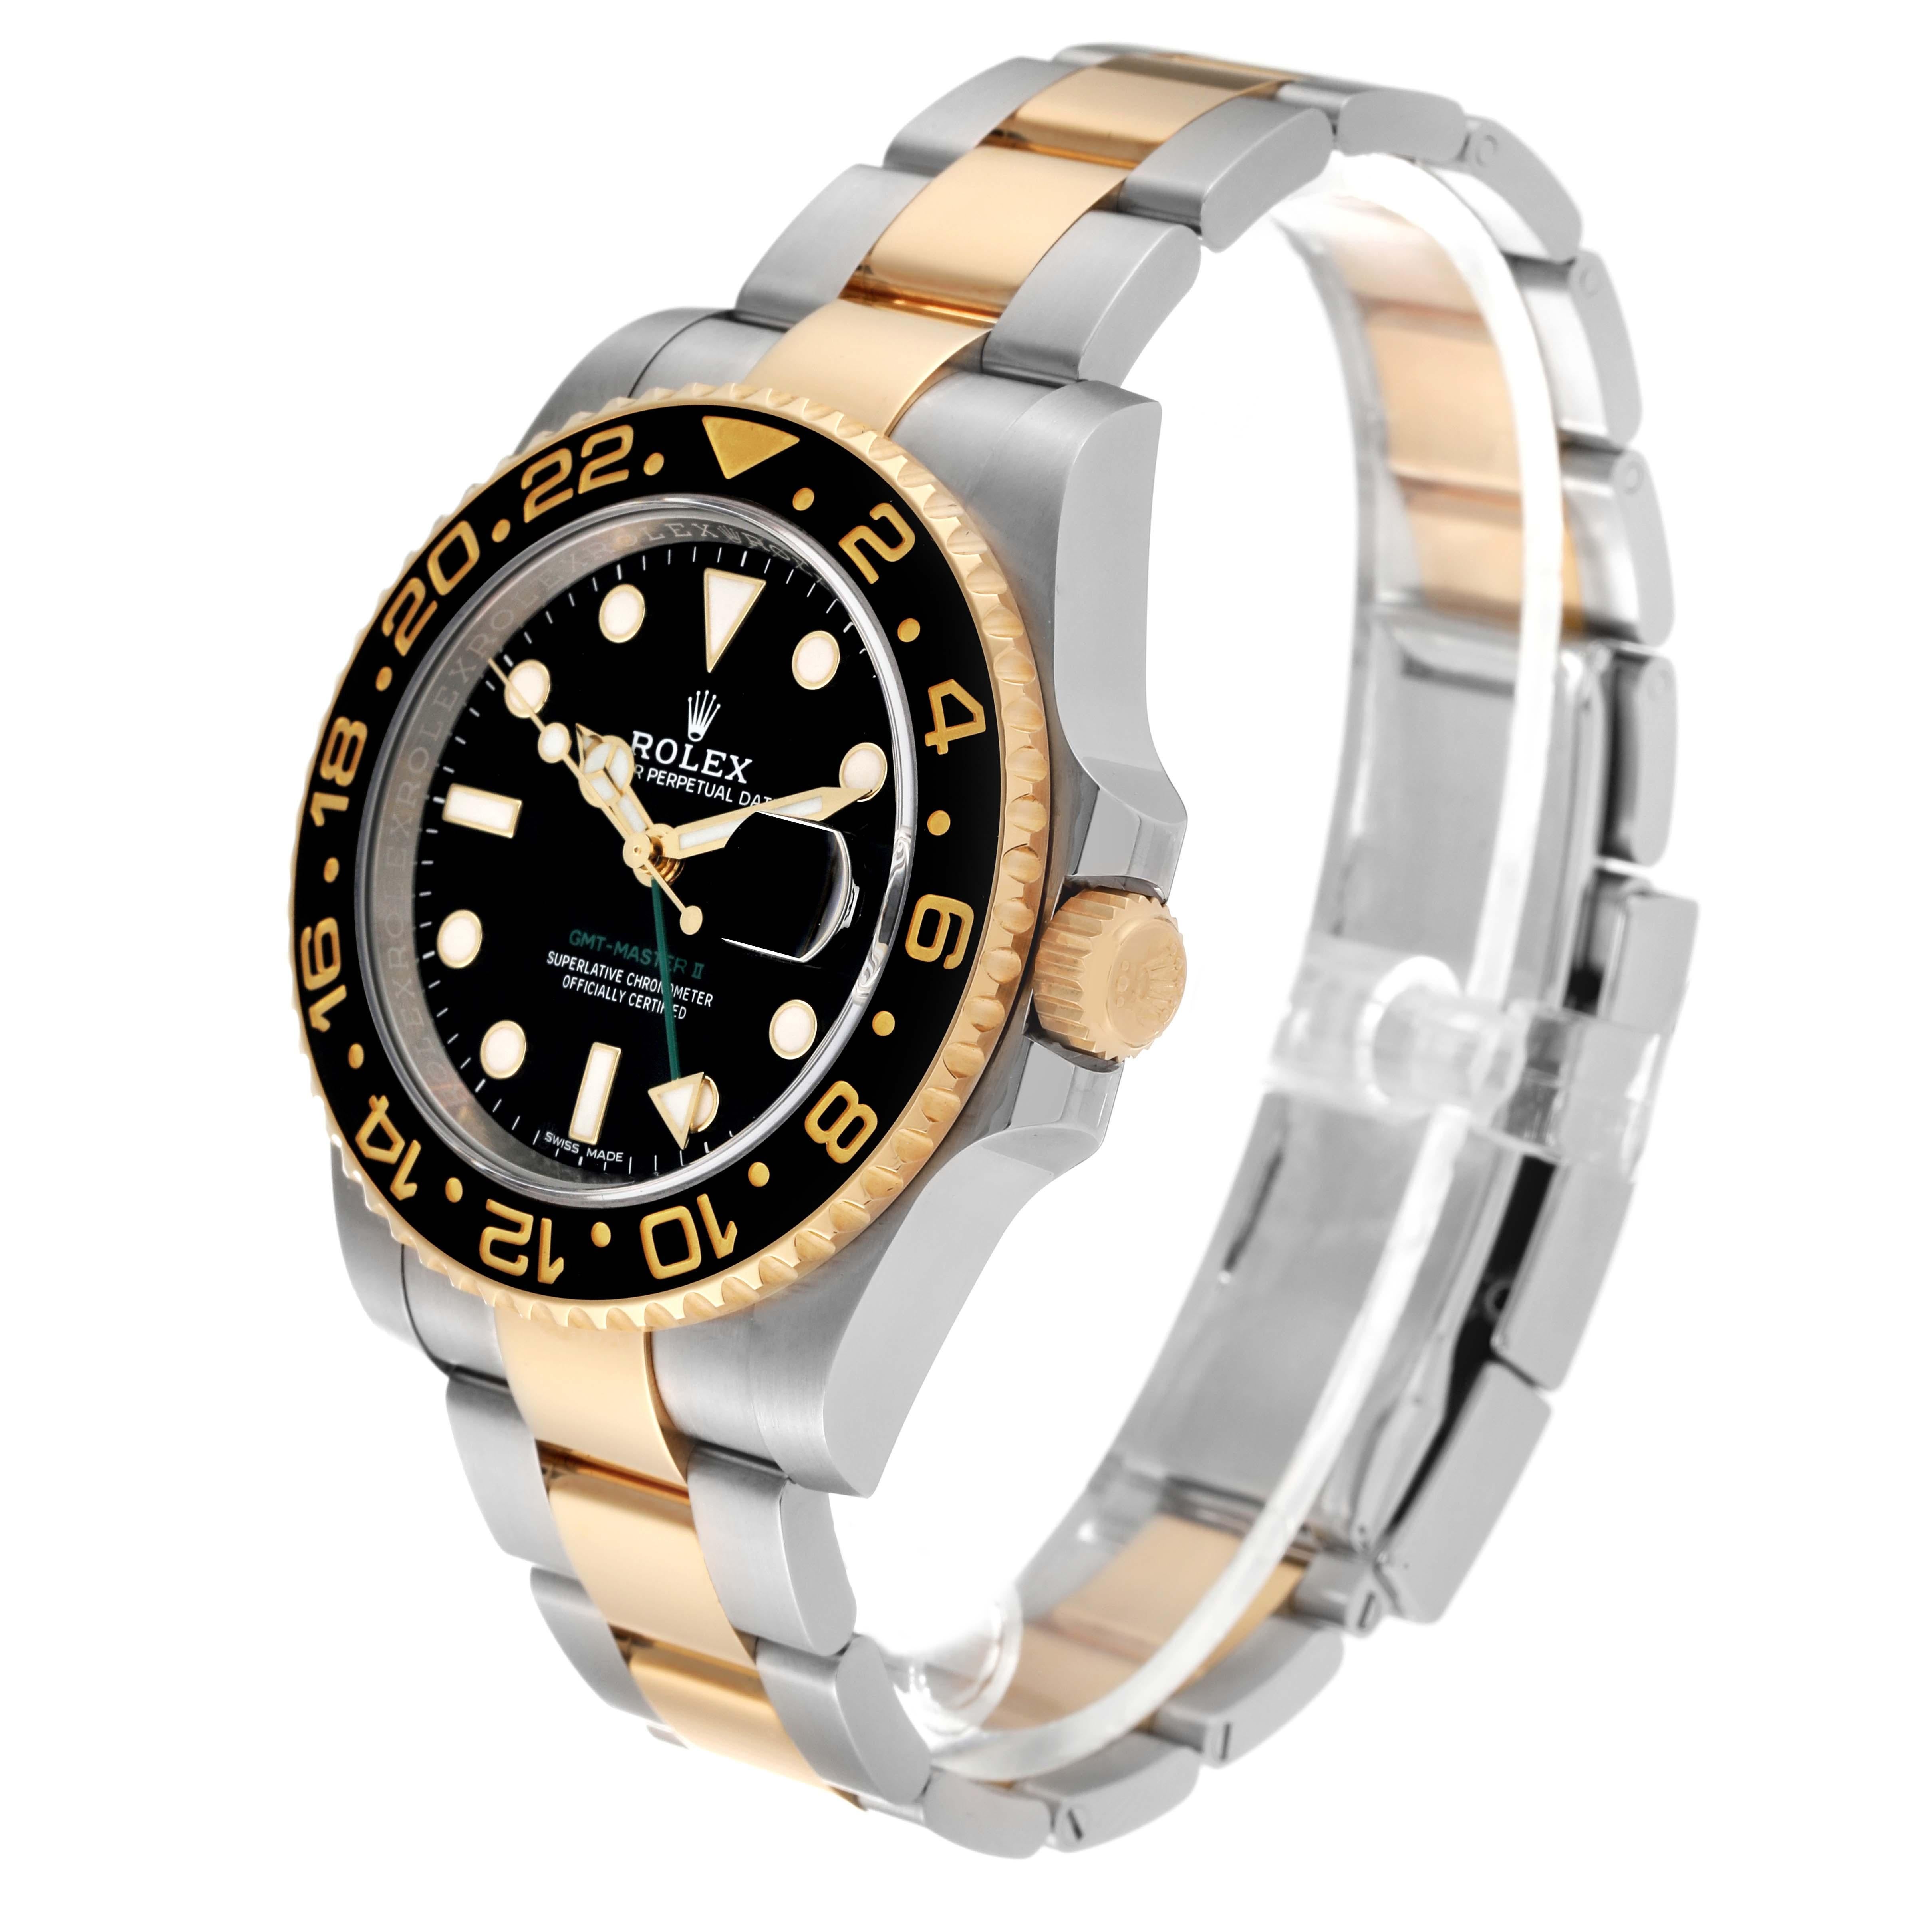 Rolex GMT Master II Steel Yellow Gold Black Dial Mens Watch 116713 Box Card 8